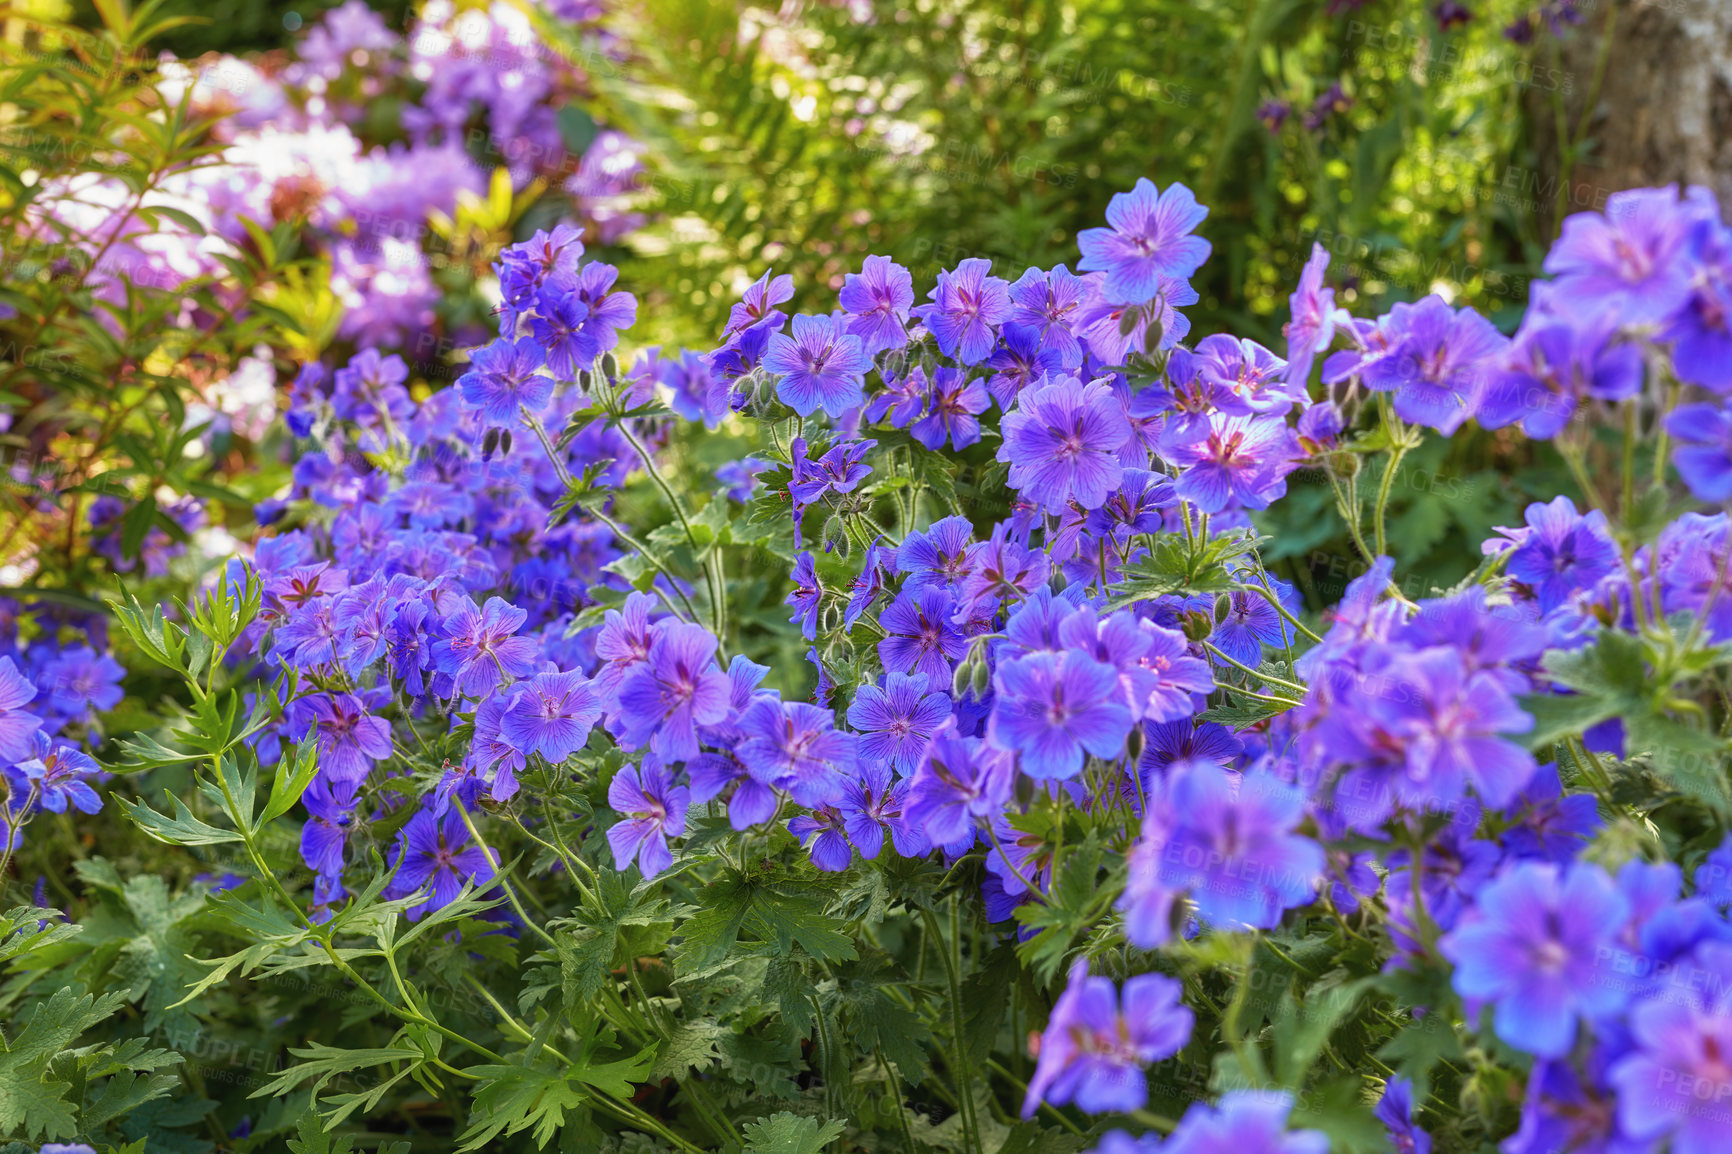 Buy stock photo Purple flowers growing in a spring garden. Many bright cranesbill flowering plants contrasting in a green park. Colorful blossoms in an ornamental shrub. Beautiful perennial plants thriving in nature